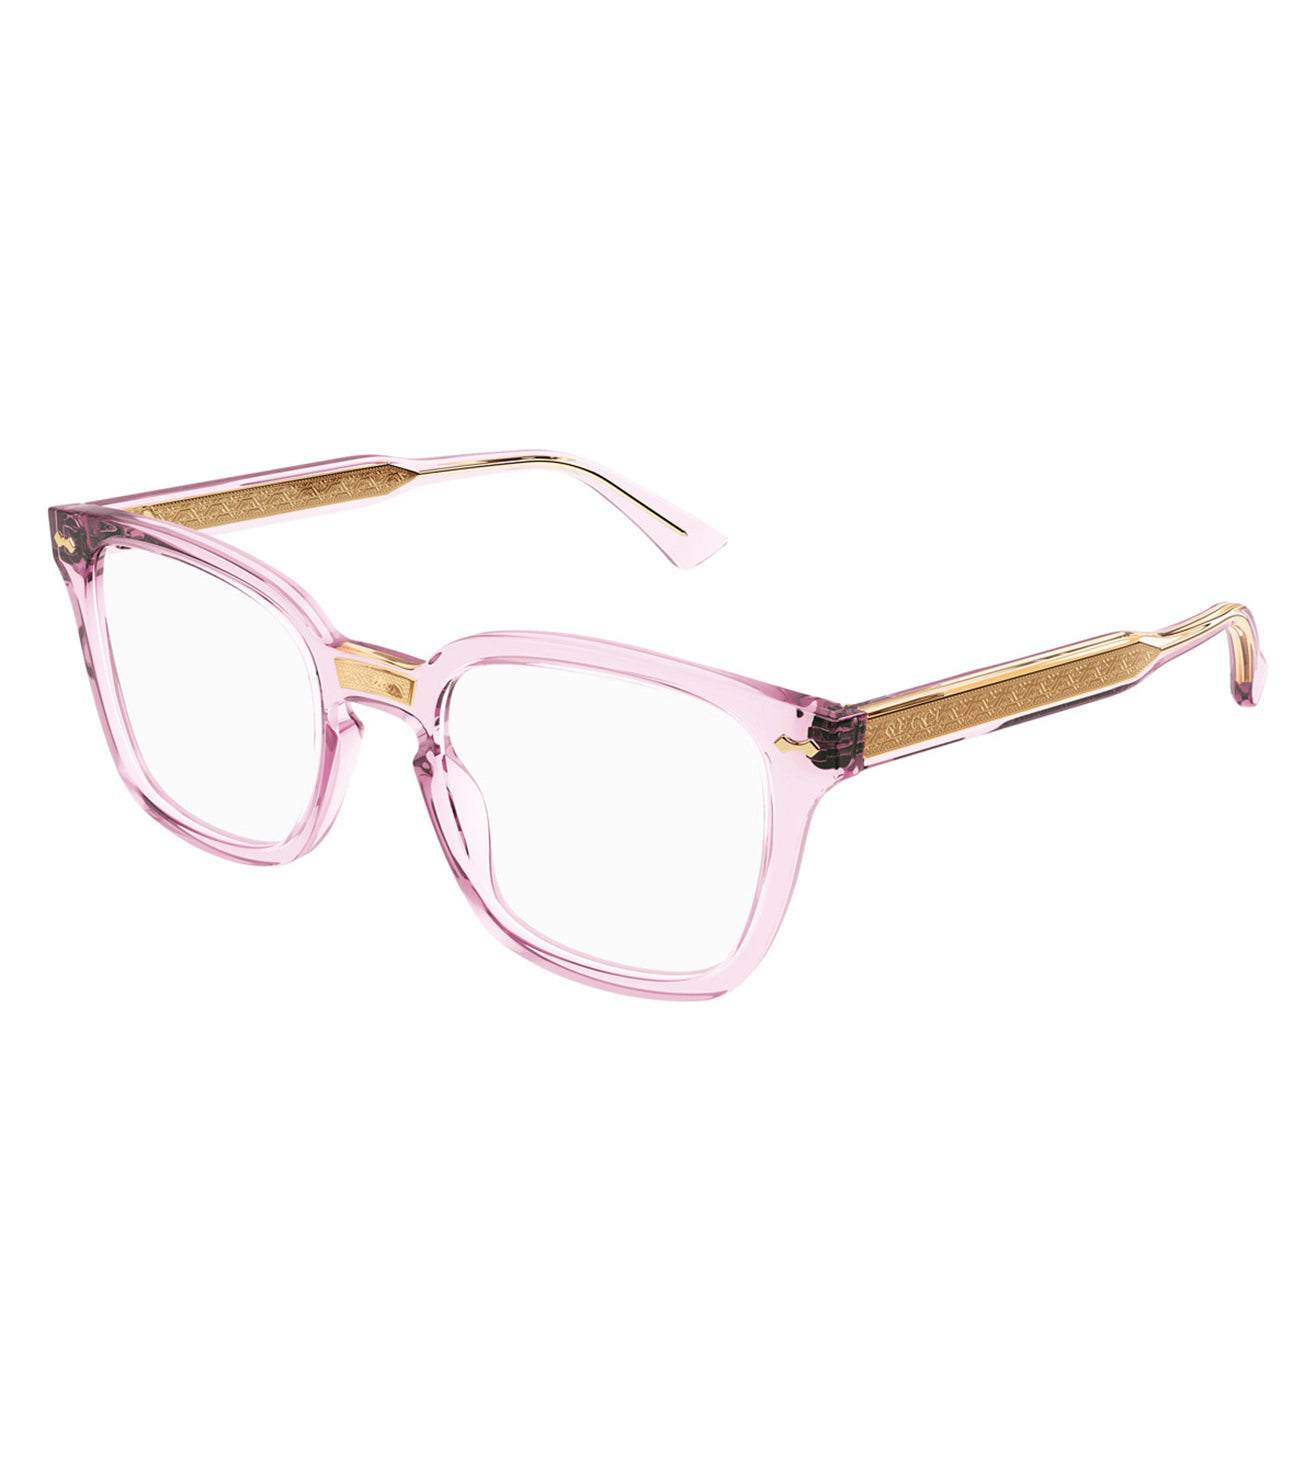 Gucci Unisex Pink Square Optical Frame